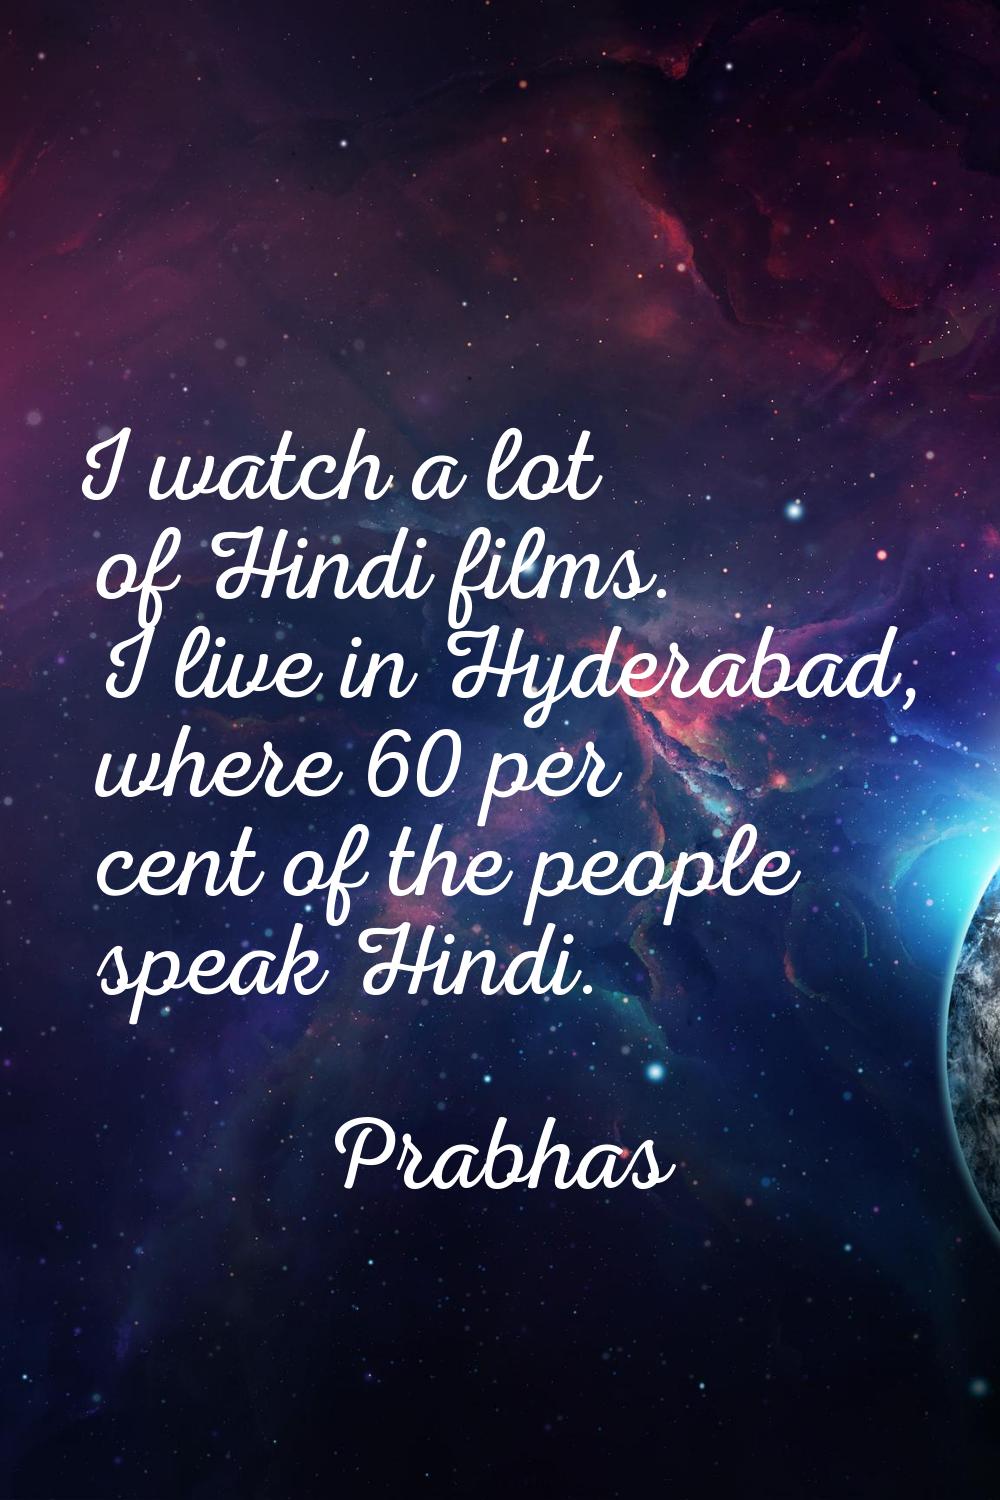 I watch a lot of Hindi films. I live in Hyderabad, where 60 per cent of the people speak Hindi.